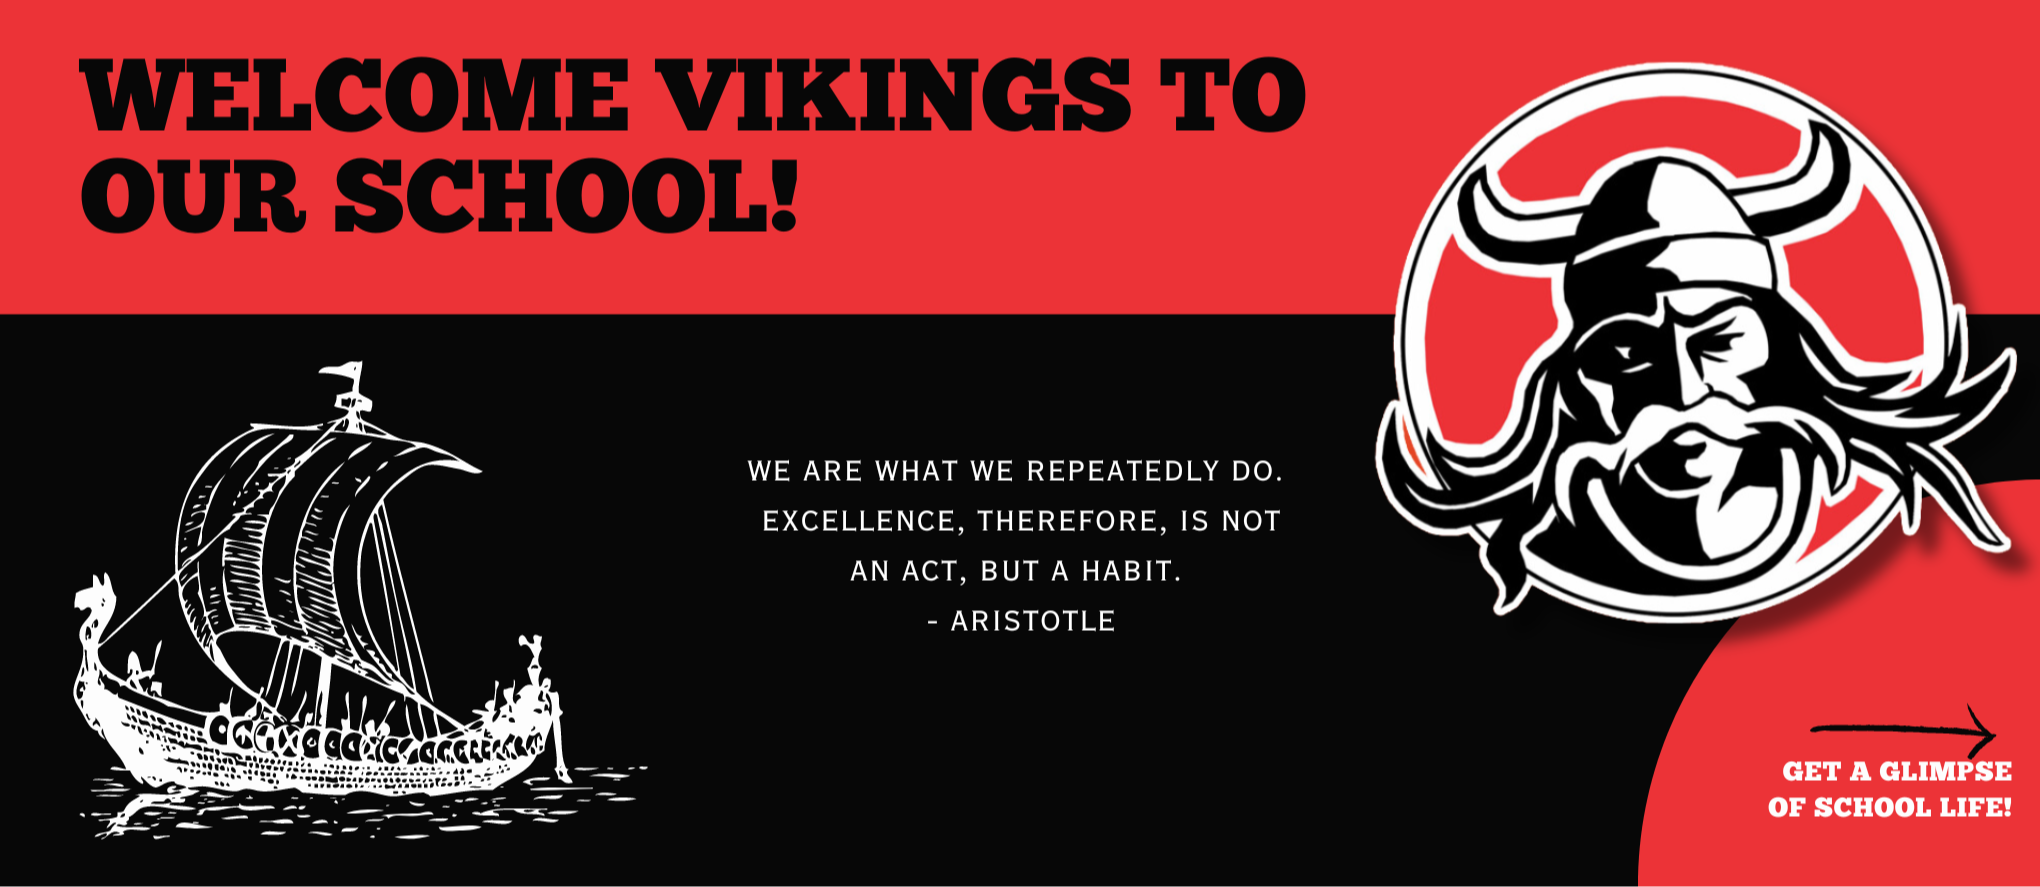 Welcome Vikings to our school!